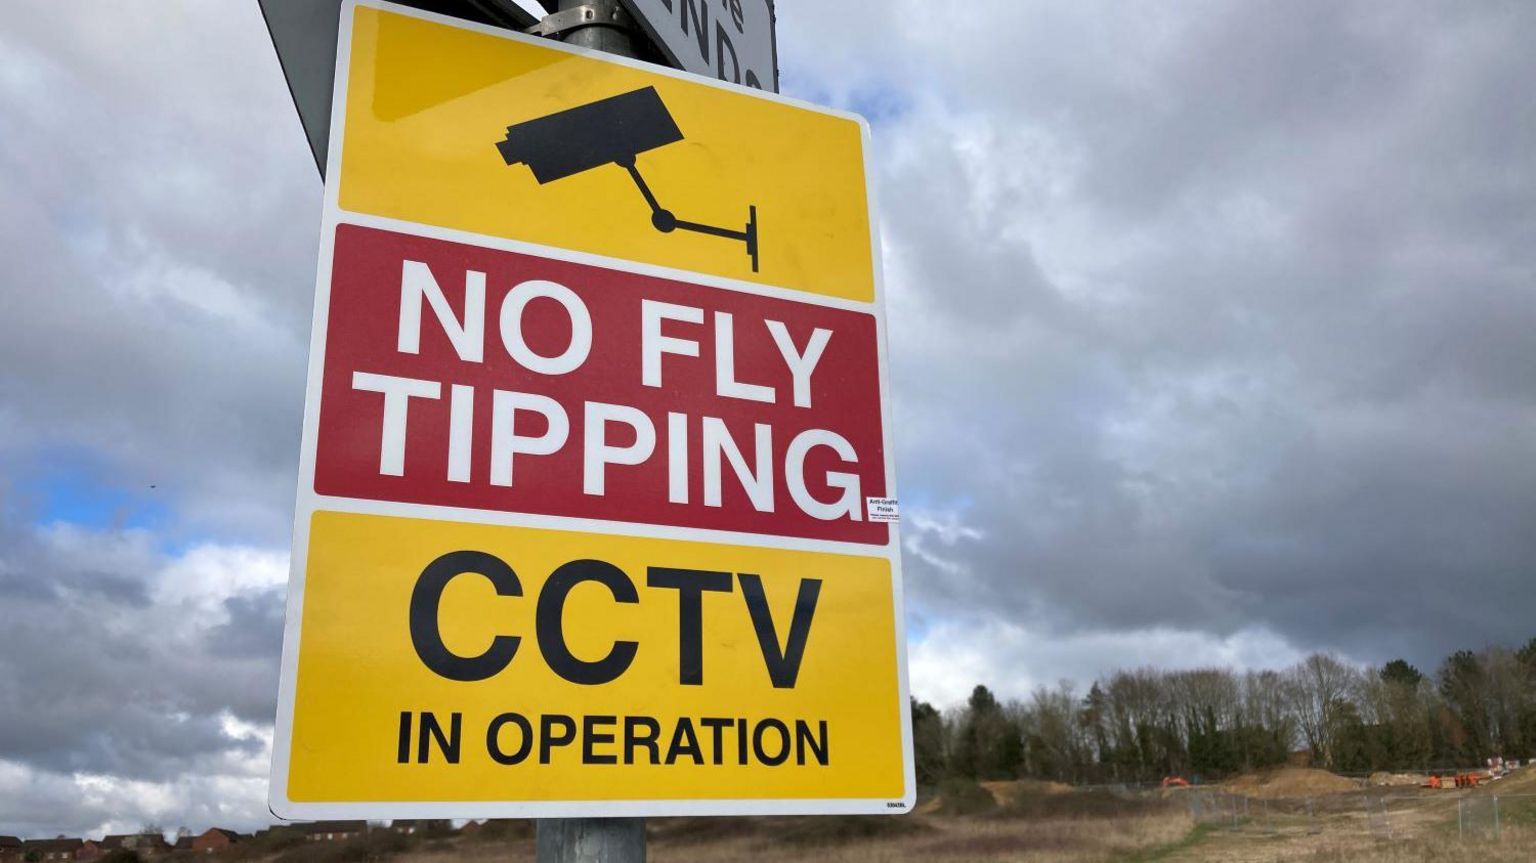 A sign that says "no fly tipping CCTV in operation"